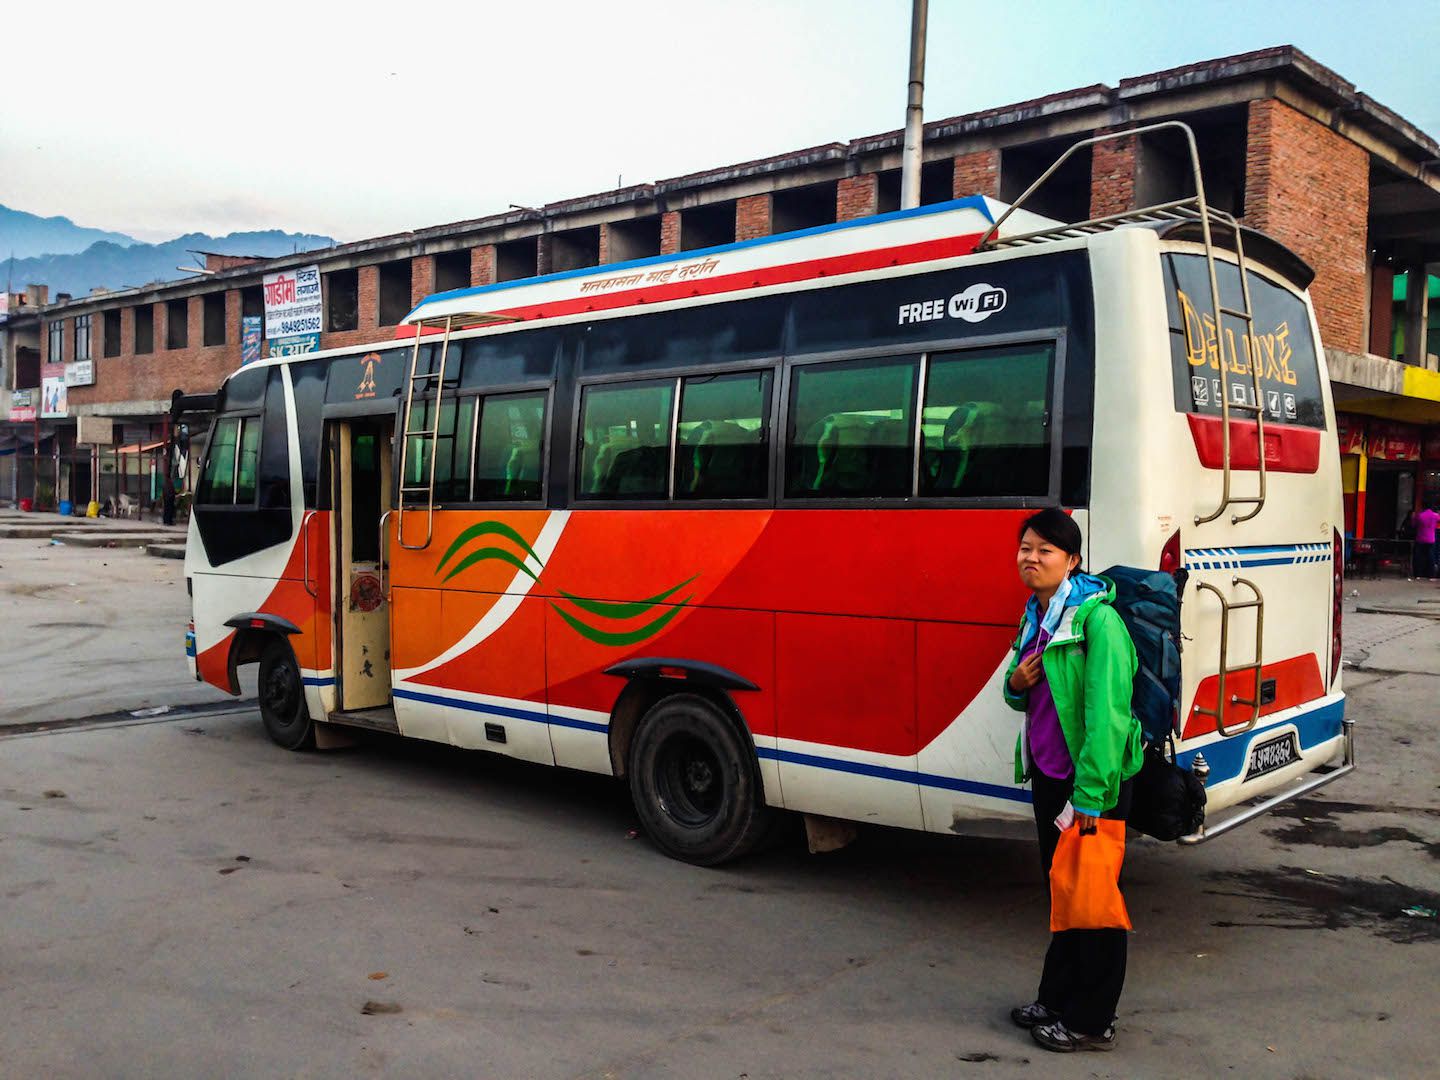 Julie in front of the local bus, Kathmandu, Nepal